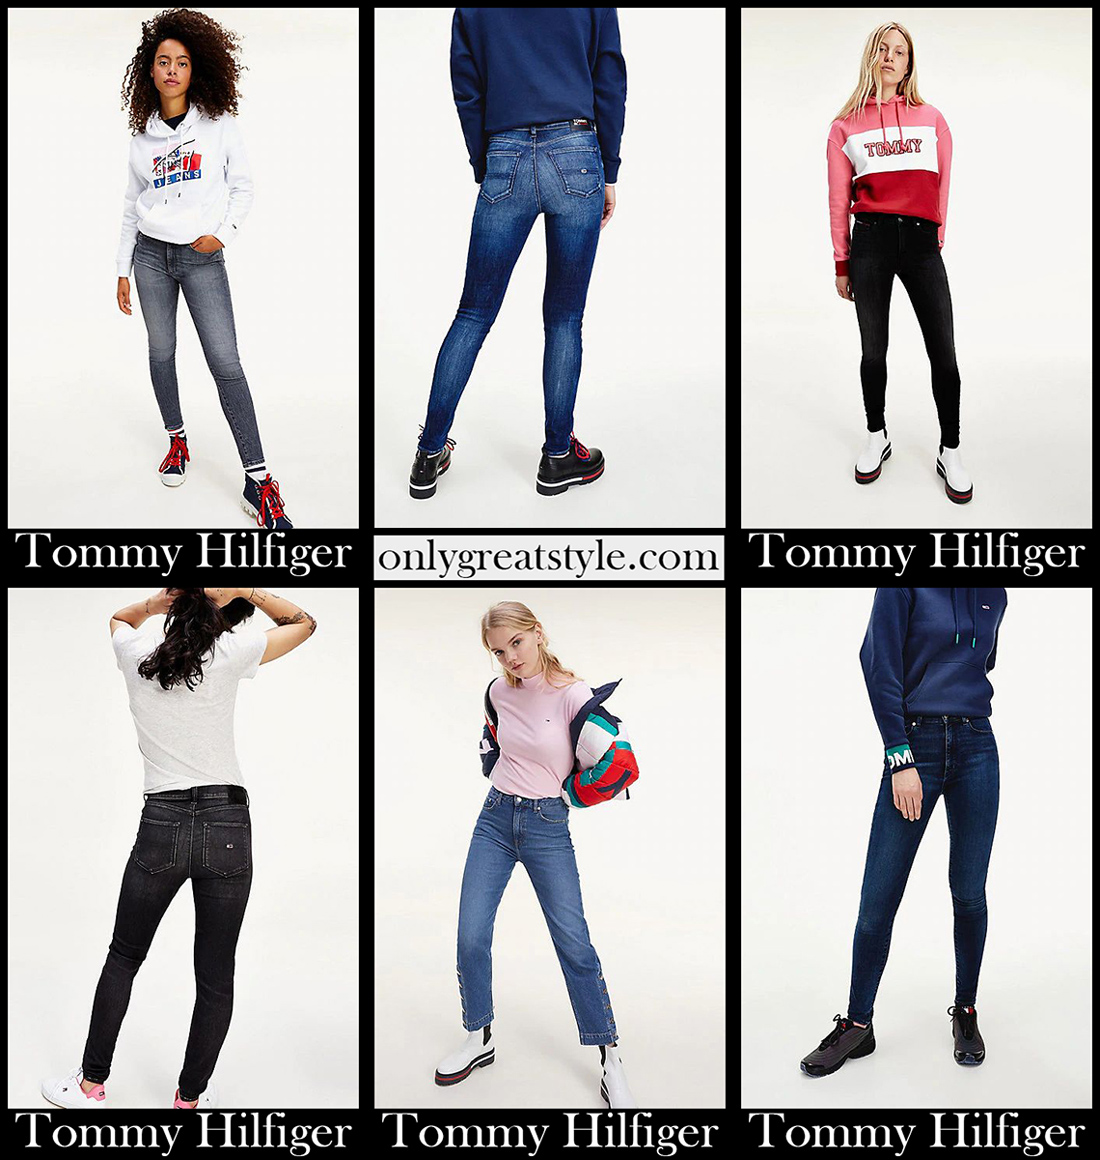 Tommy Hilfiger jeans 2021 new arrivals 